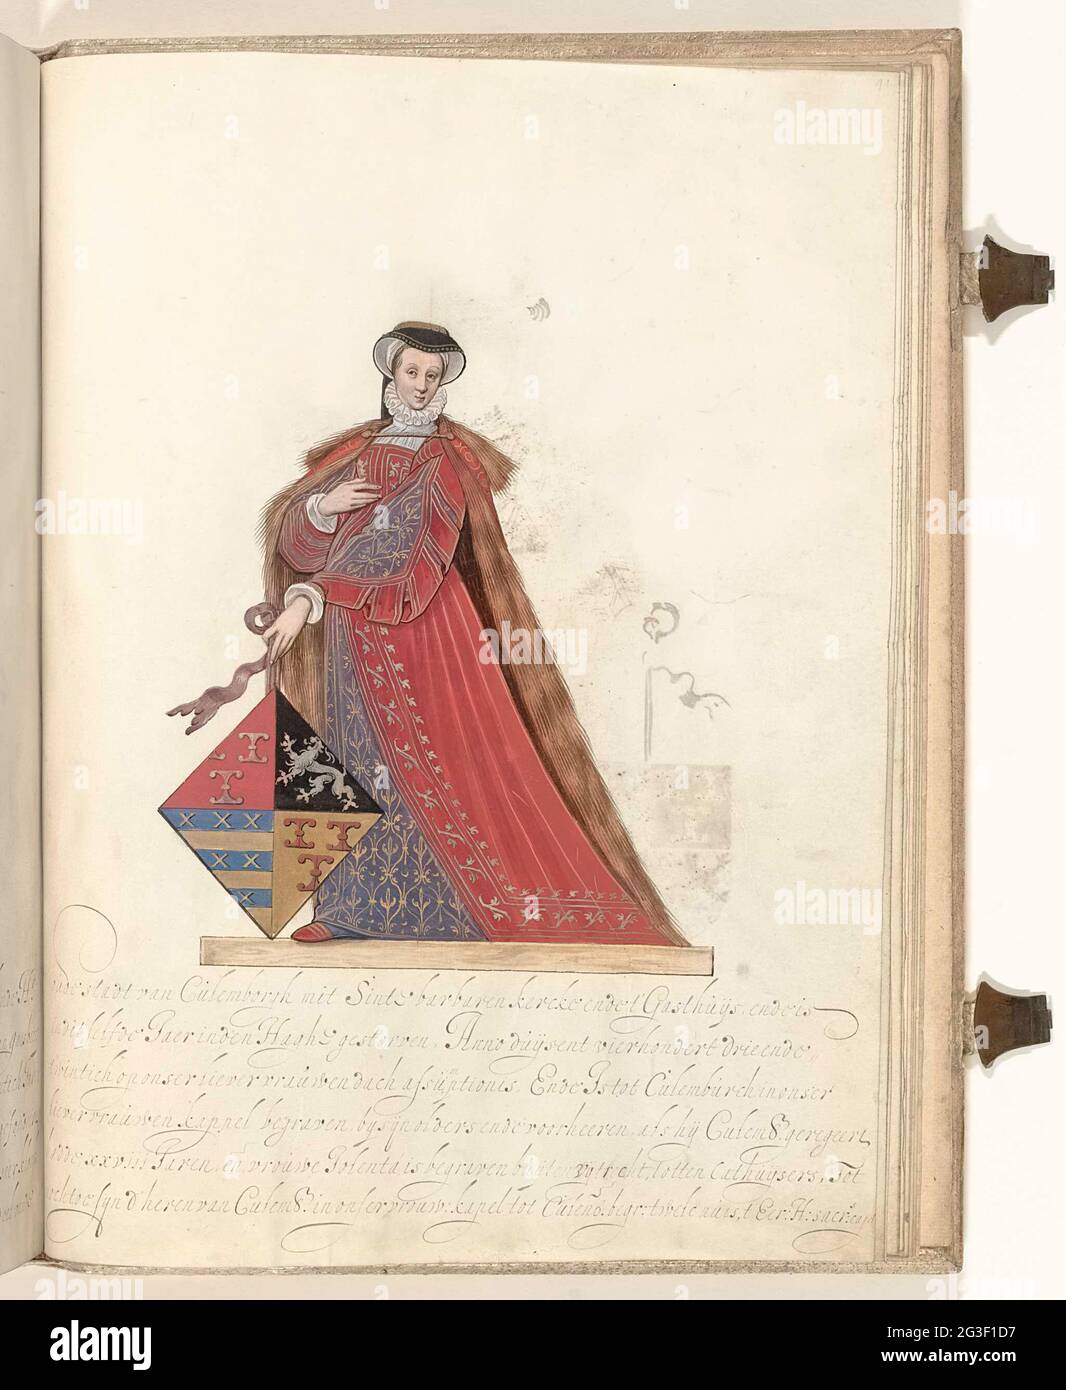 Jolanthe van Gaesbeek, Lady of Culemborg. Jolanthe (also Jolenta and Jolenthe) by Gaesbeeck, Lady of Culemborg. Wife of Hubrecht V, Mr. van Culemborg. Full of feet with the great coat of arms of Culemborg and Van der Leck. Part of an illustrated handwriting with the genealogy of the men and digging Culemborg. Stock Photo